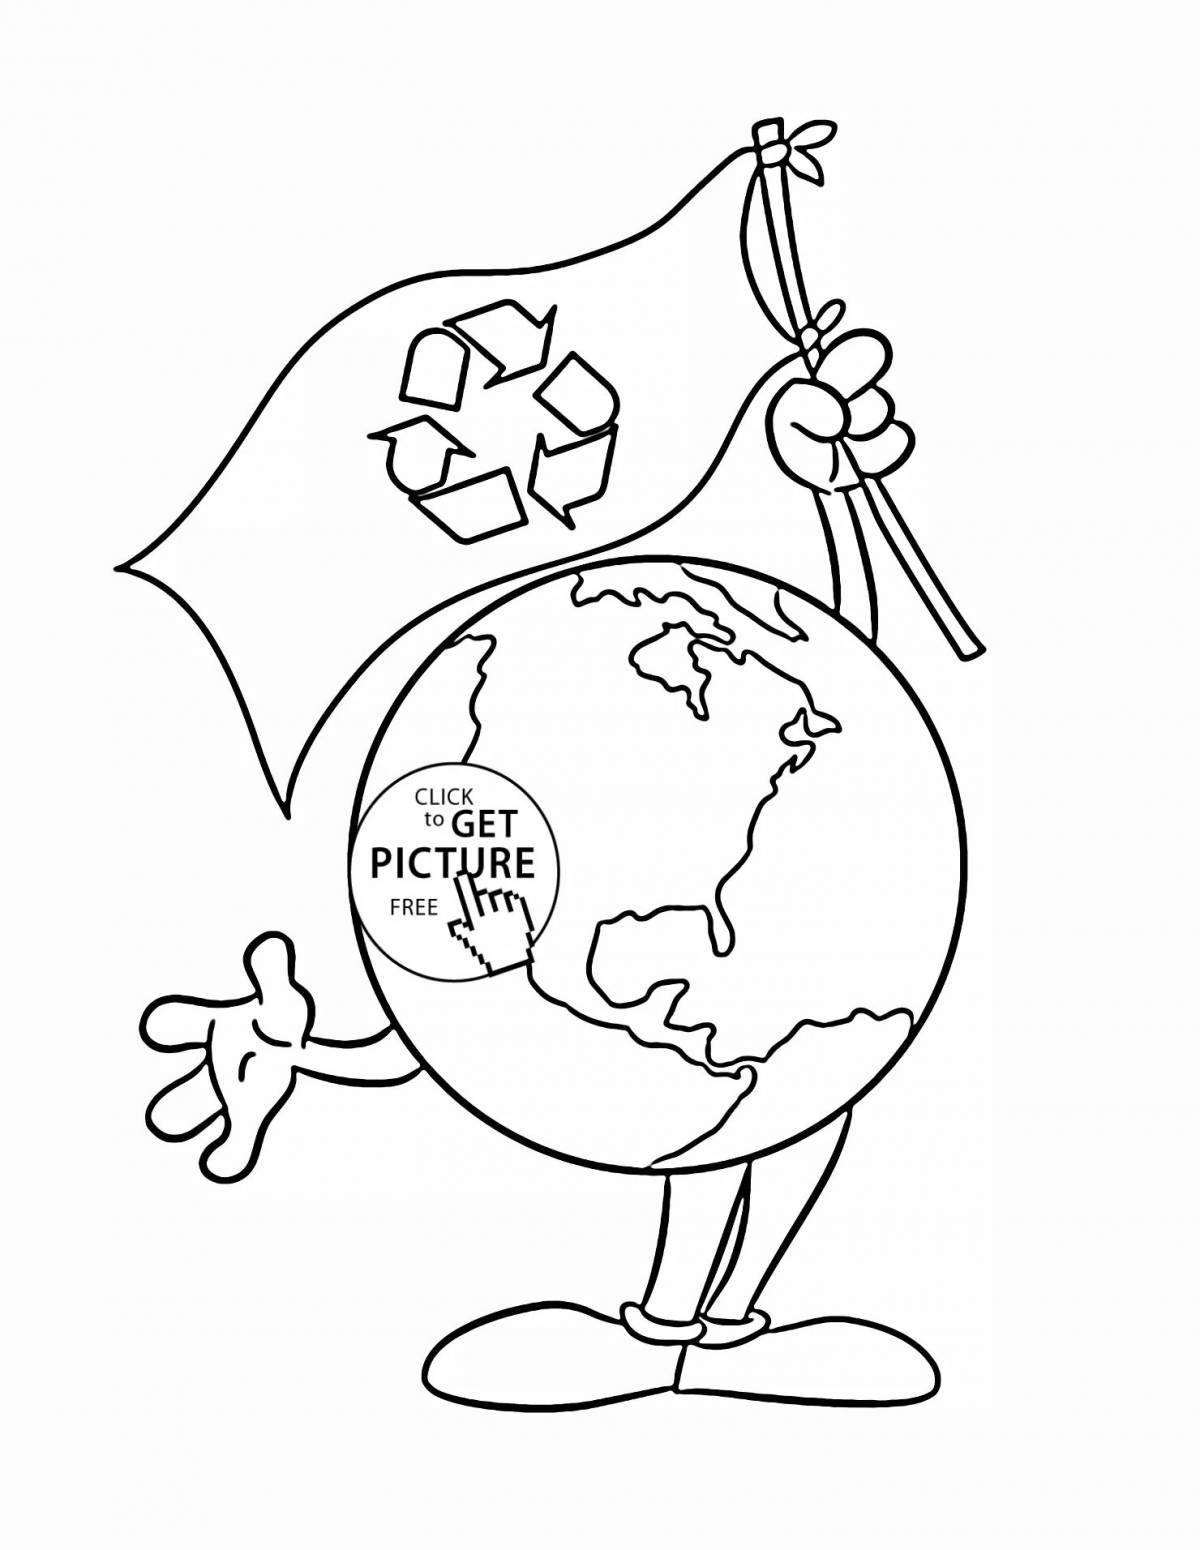 Save nature bright coloring page